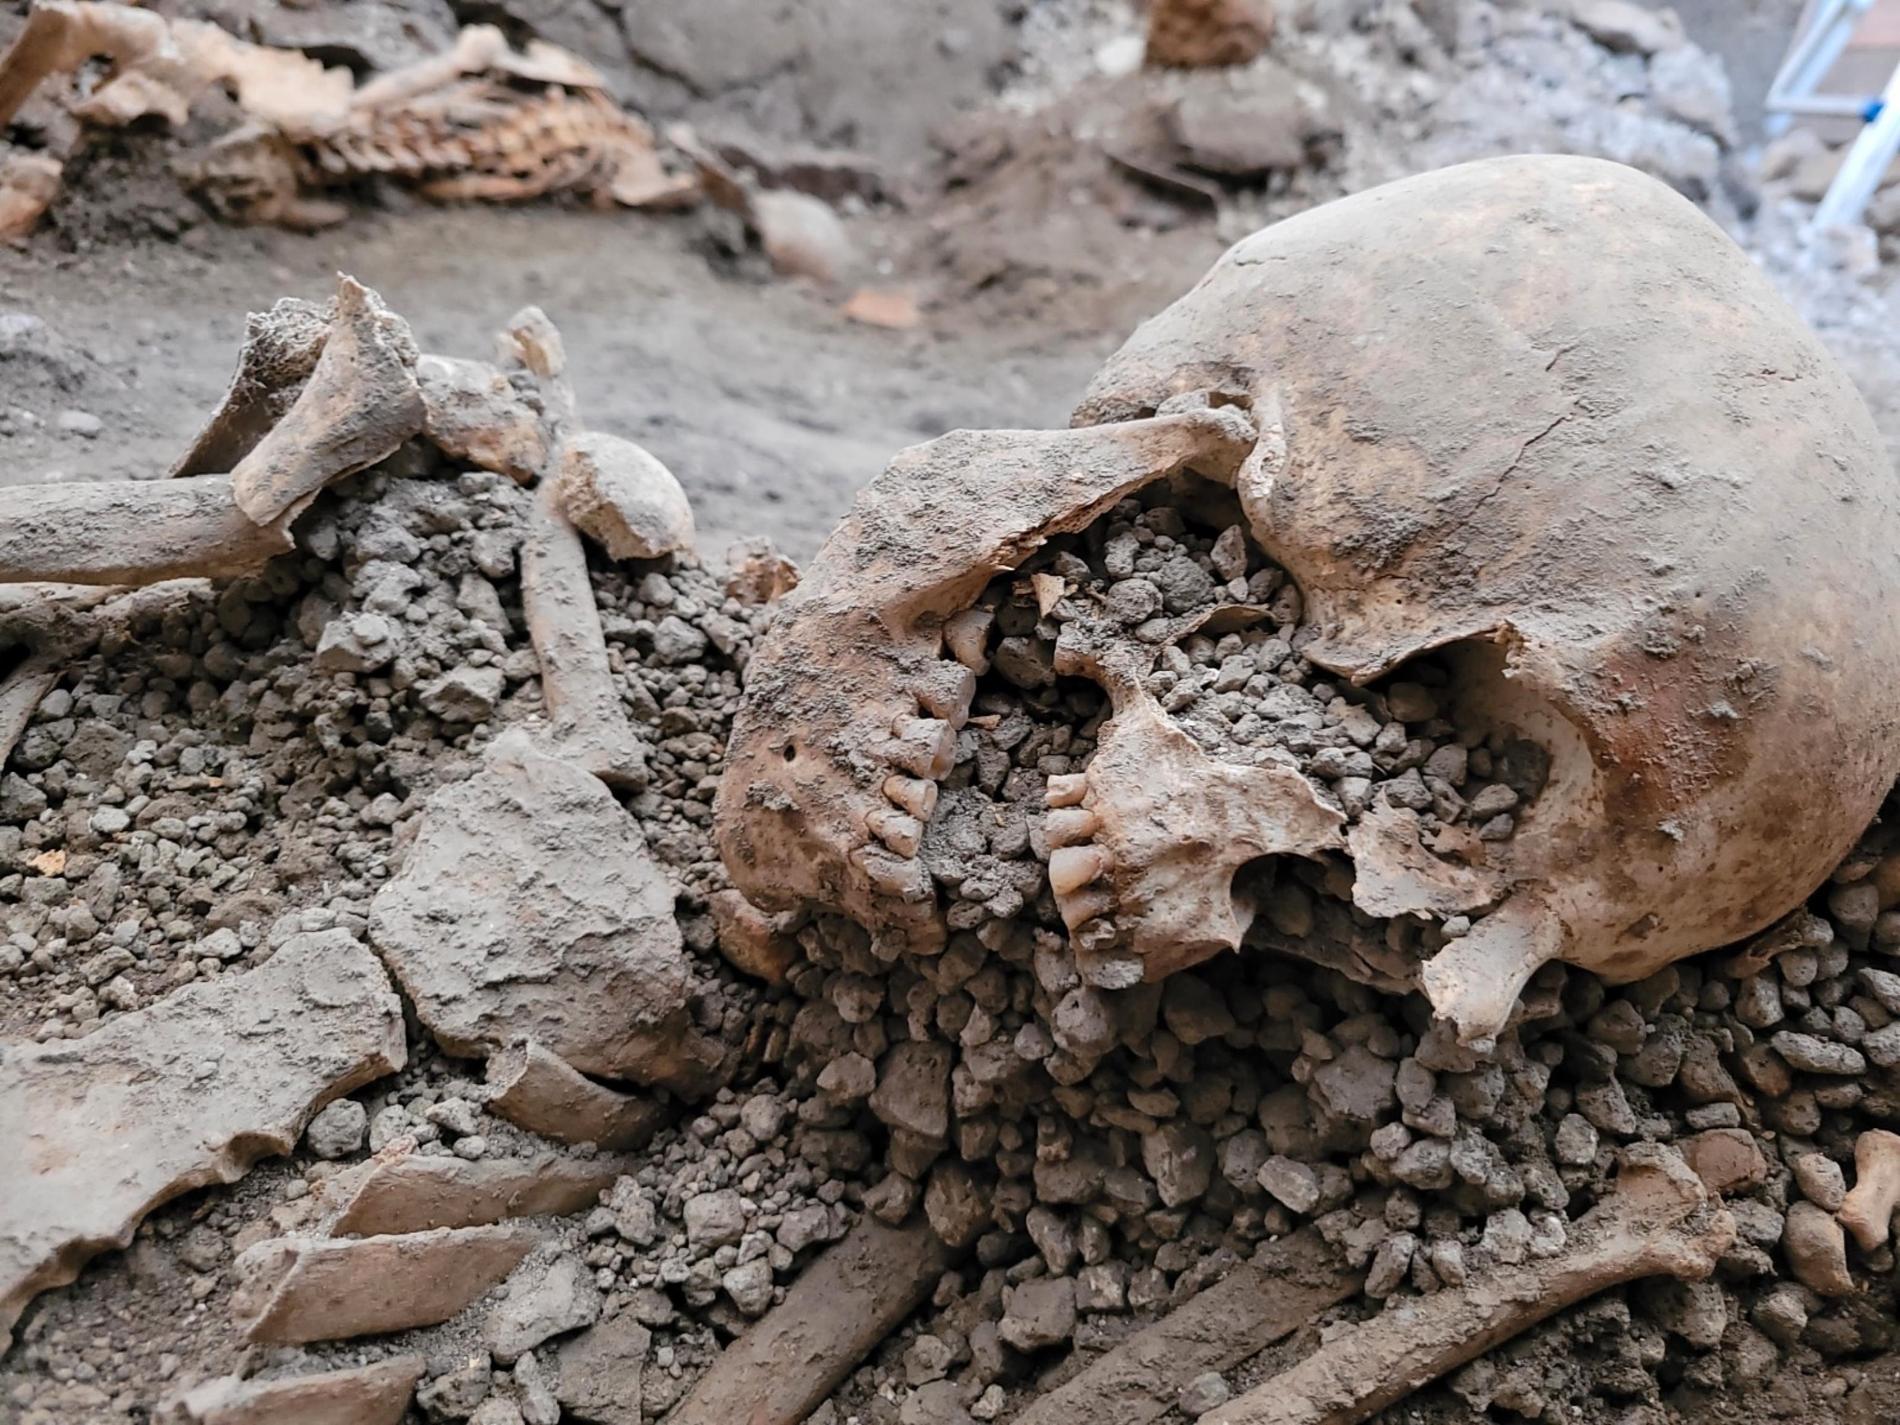 Archaeological discovery: New skeletons discovered in Pompeii